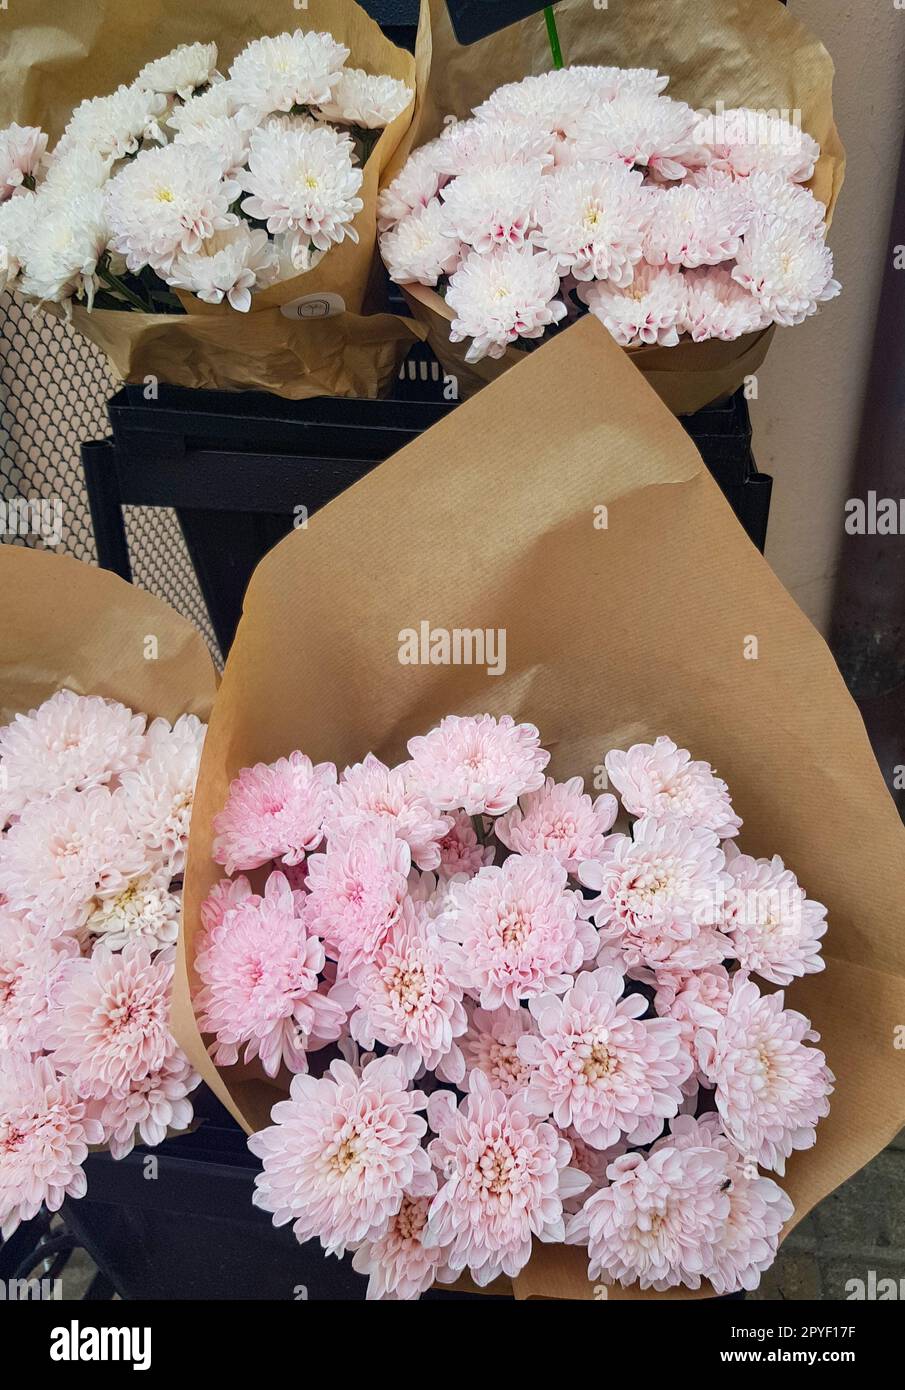 Hands of Caucasian woman wrapping bouquet in brown paper Stock Photo - Alamy